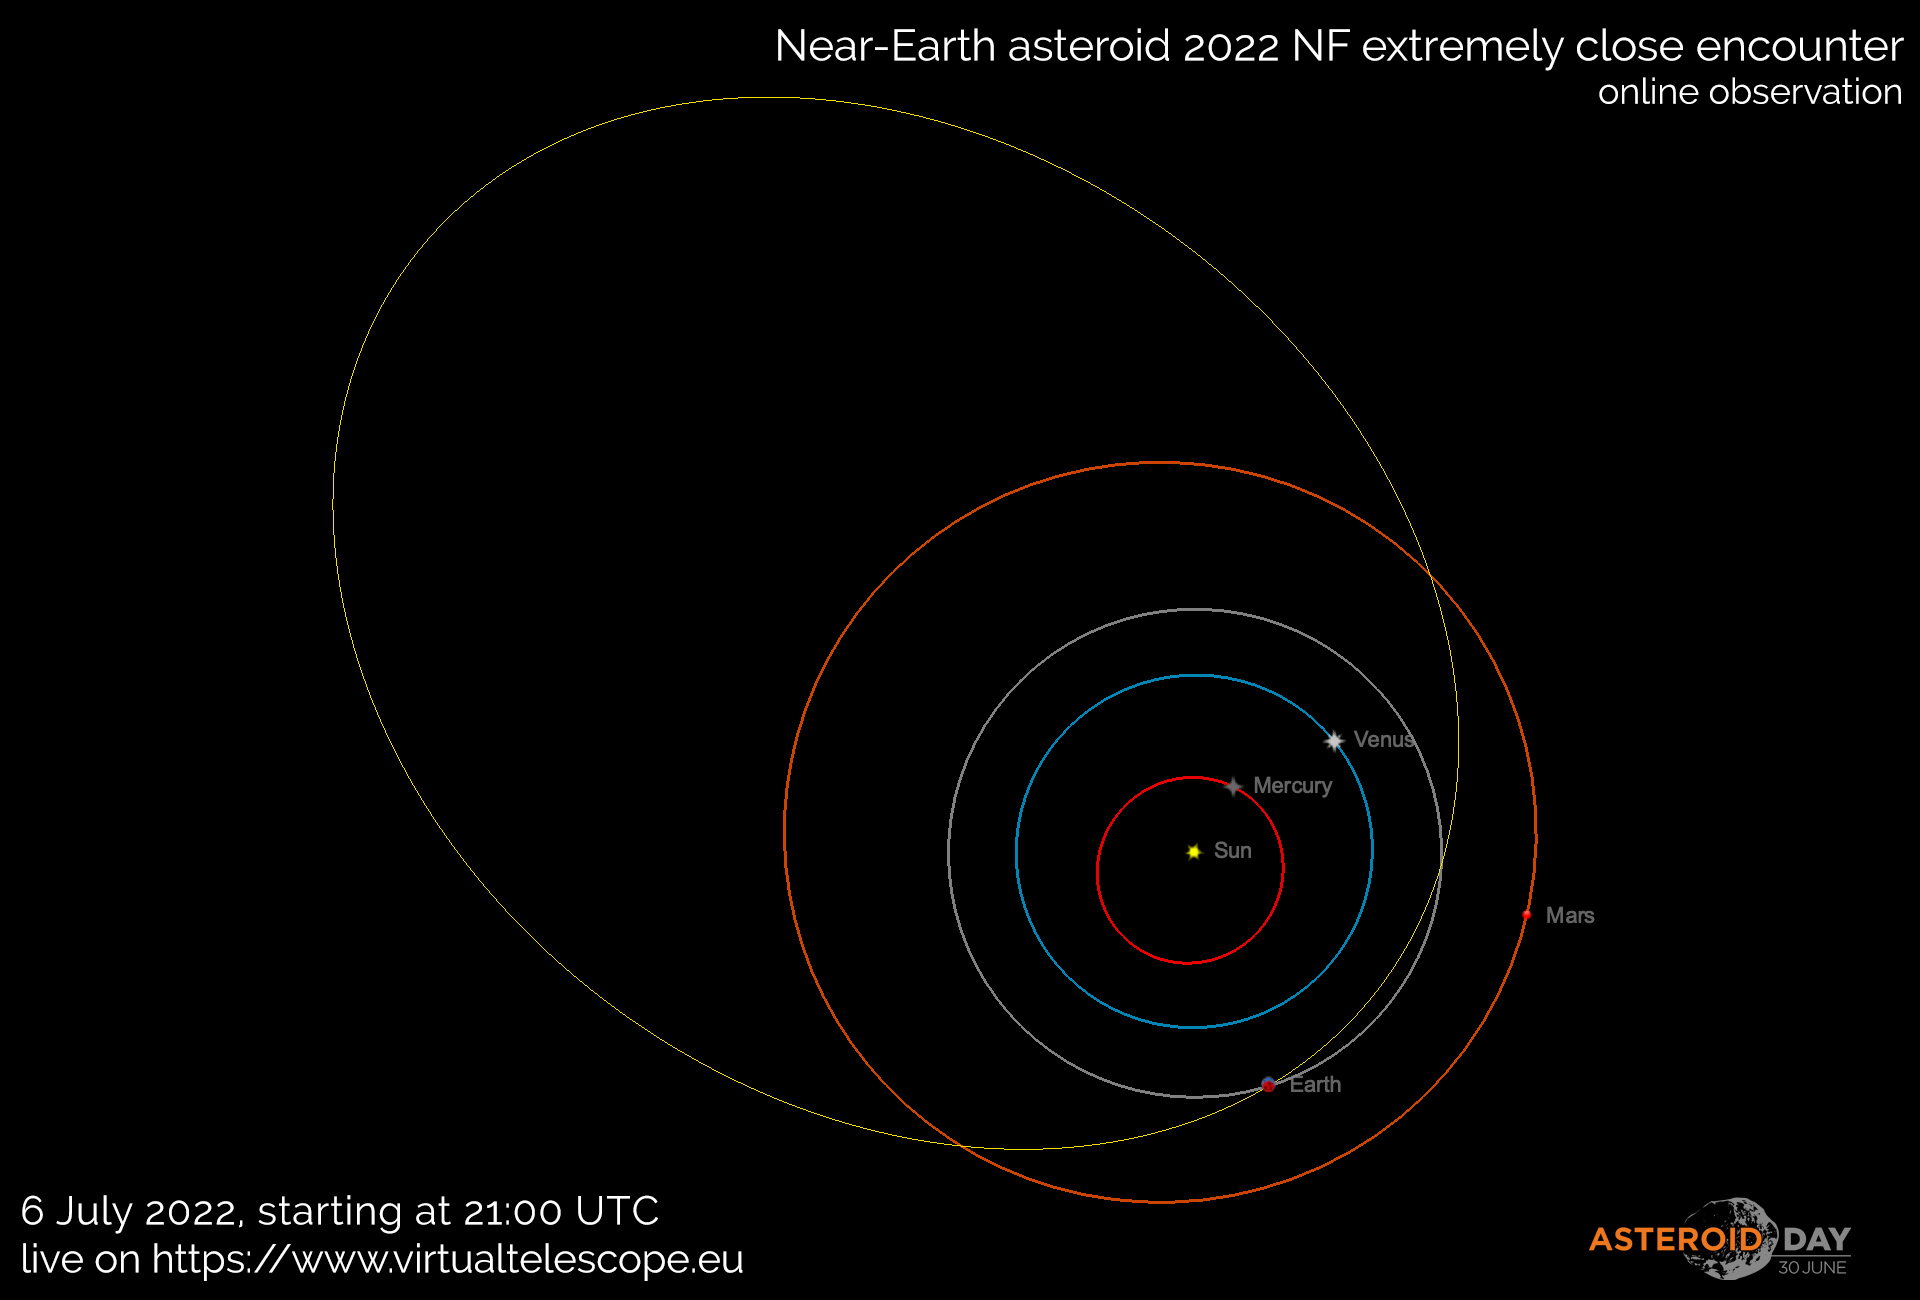 Near-Earth asteroid 2022 NF: poster of the event.